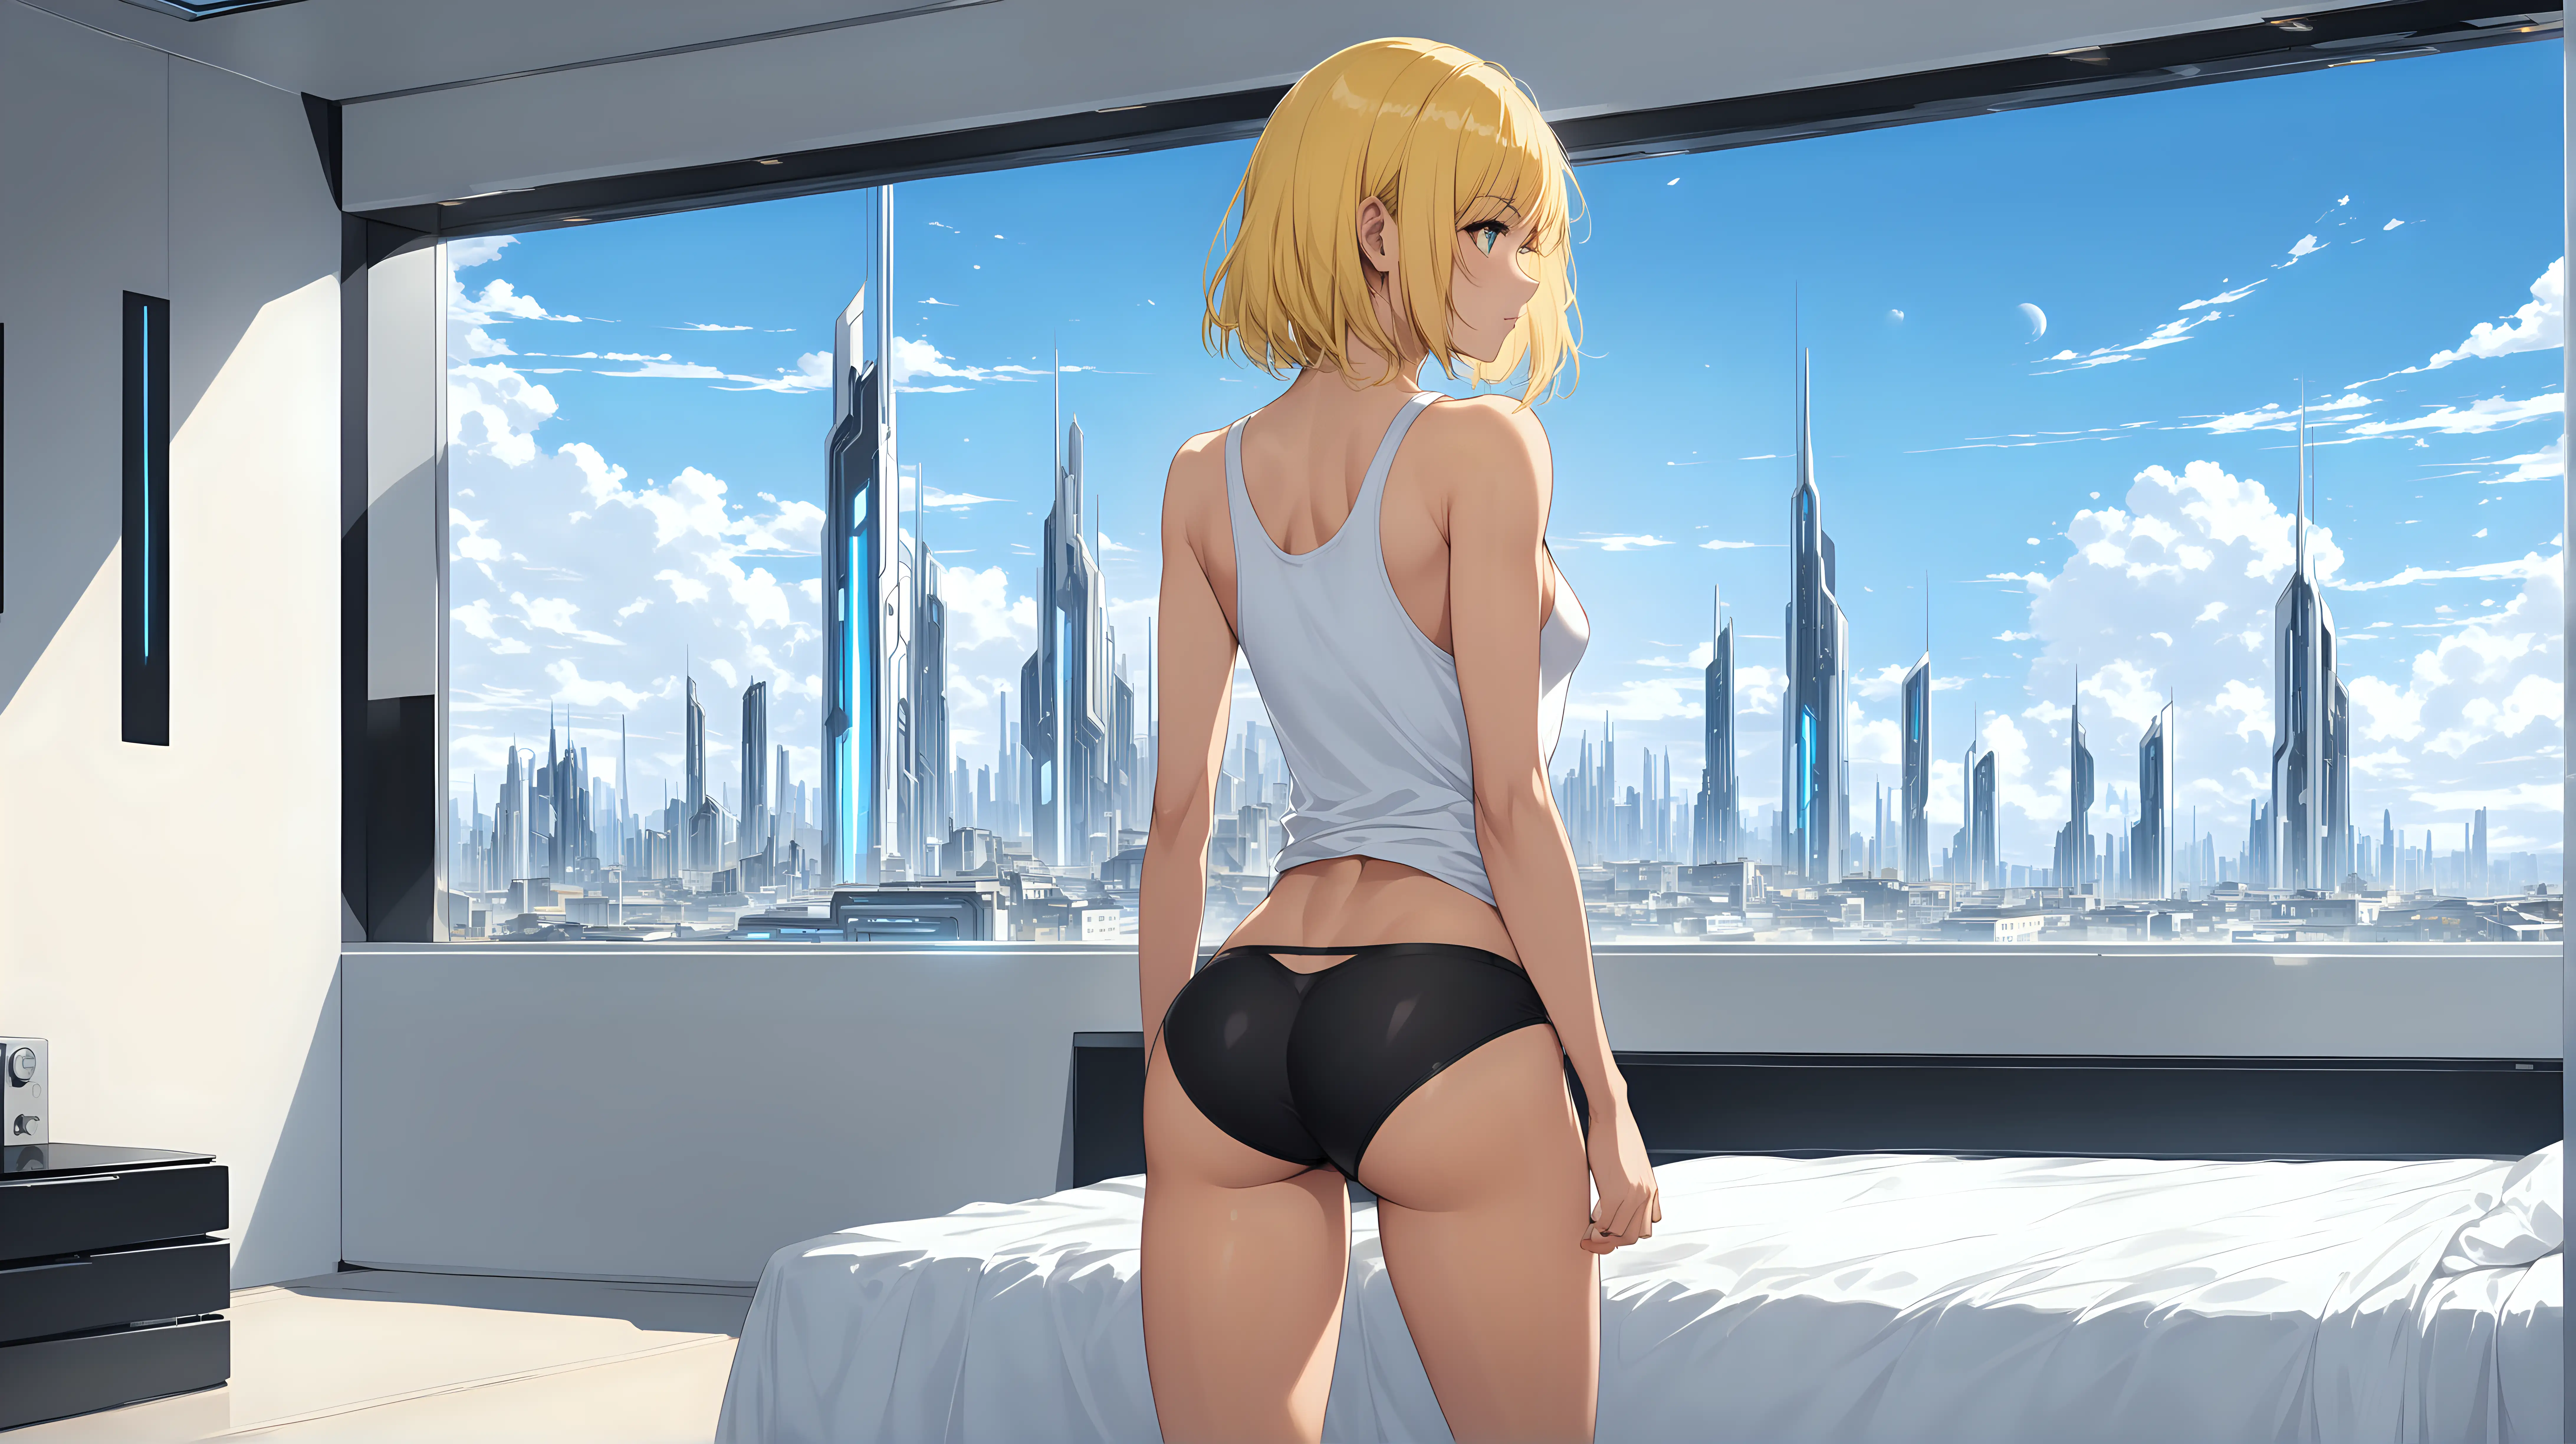 sexy fit 24 year old hero girl, short chin length yellow hair, walking over to bed in futuristic apartment, wearing short white tank top, black panties, sexy toned body, blue sky and futuristic town in background through window, yellow black white 3 color minimal design